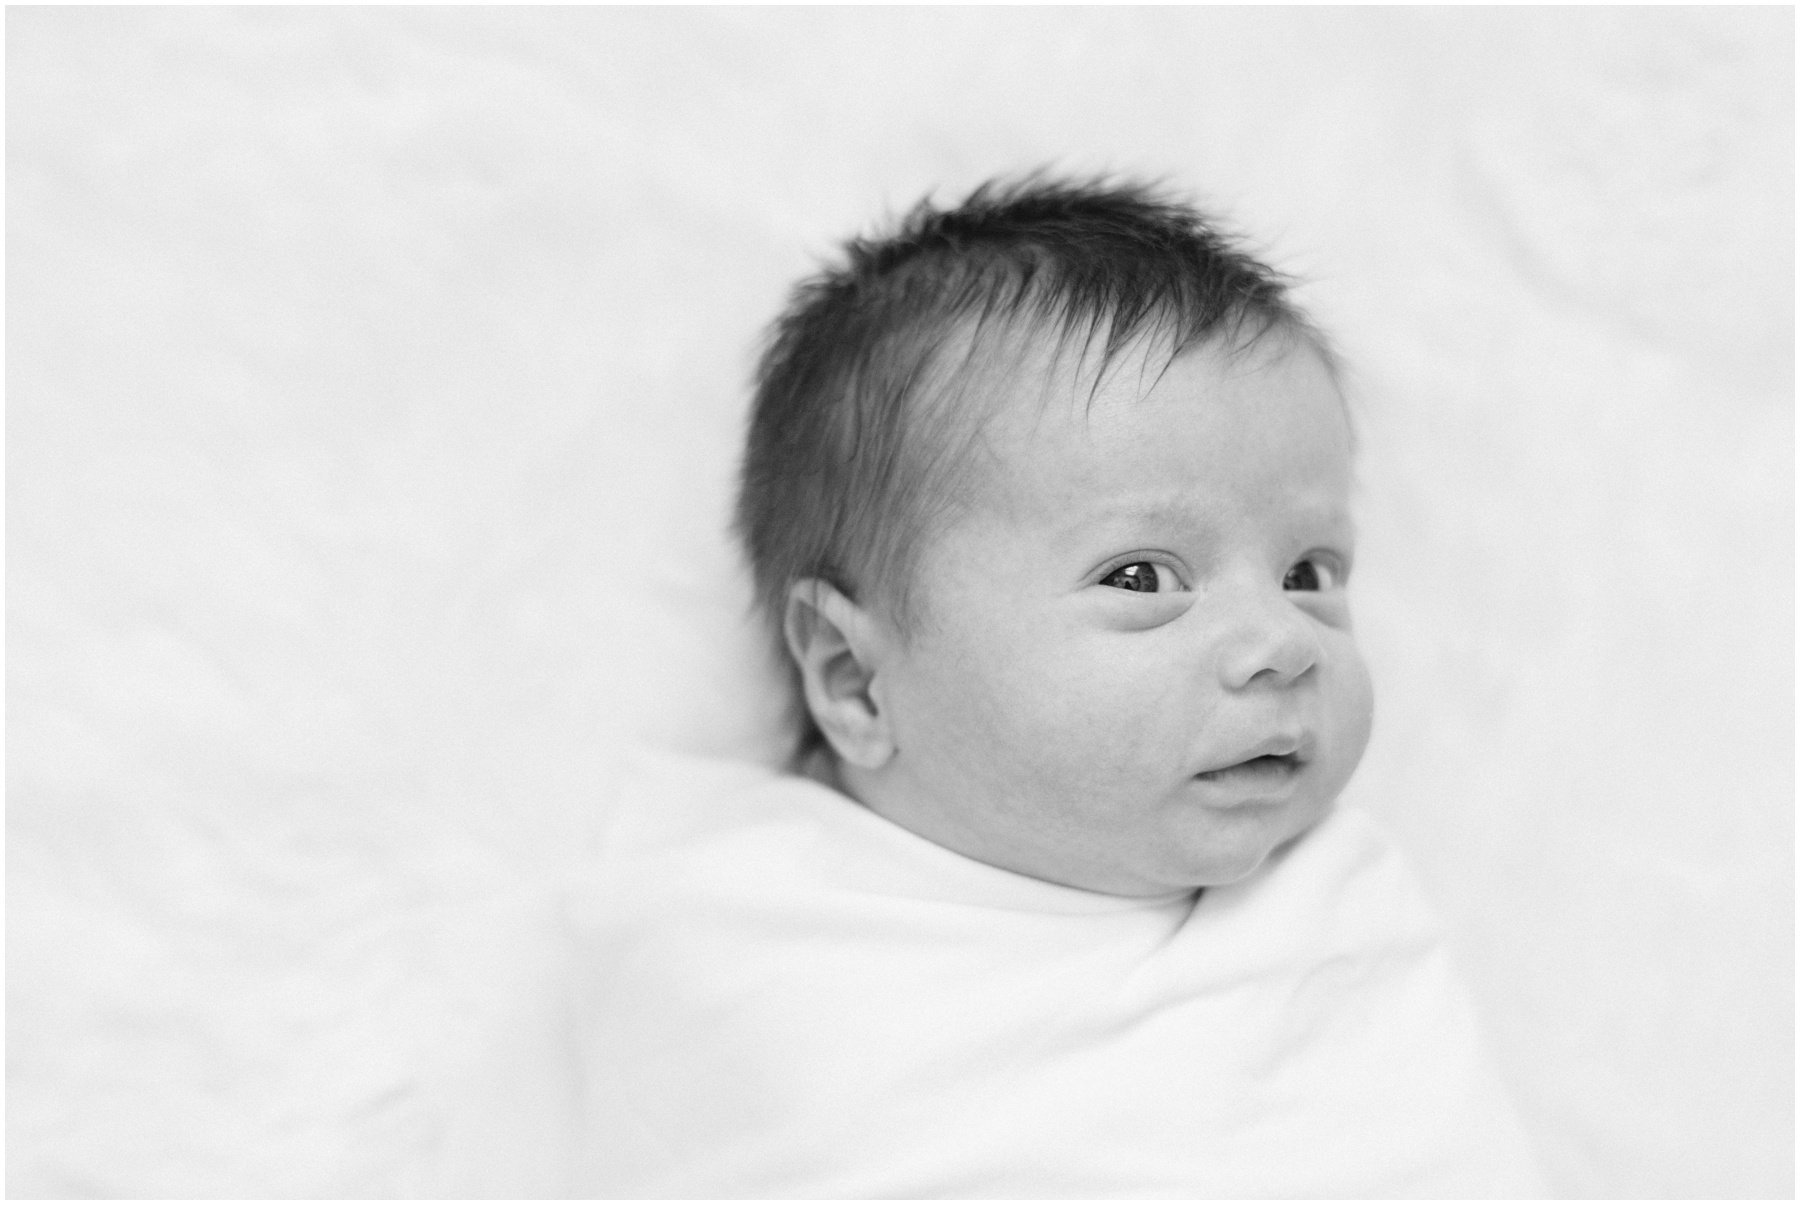 Newborn baby looking at camera while swaddled during Florida milestone photography session | NKB Photo